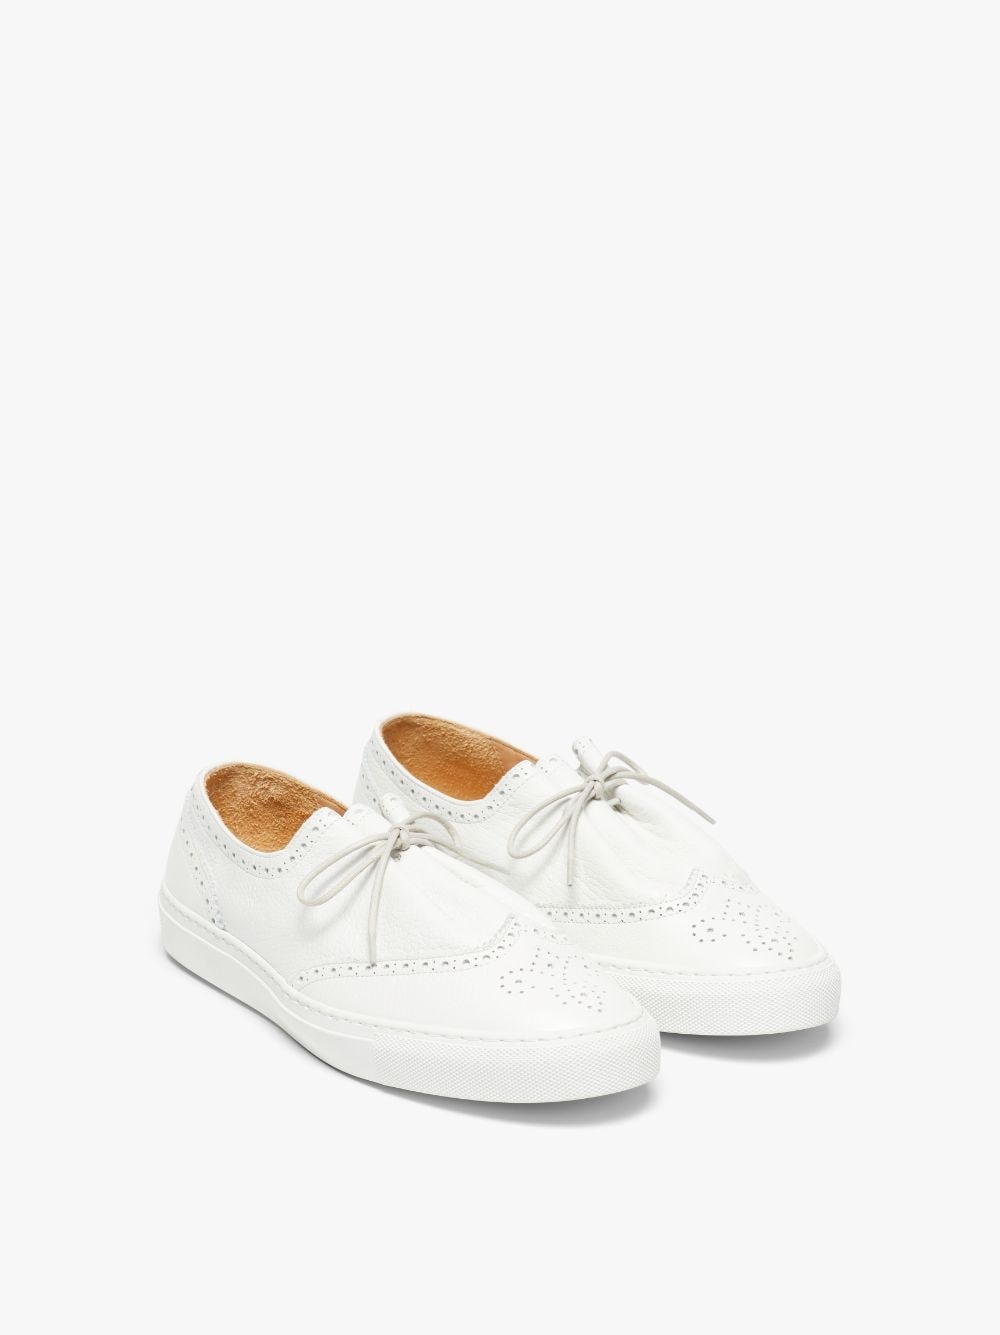 JACQUES SOLOVIÈRE WHITE LEATHER GOLF SNEAKERS - 2